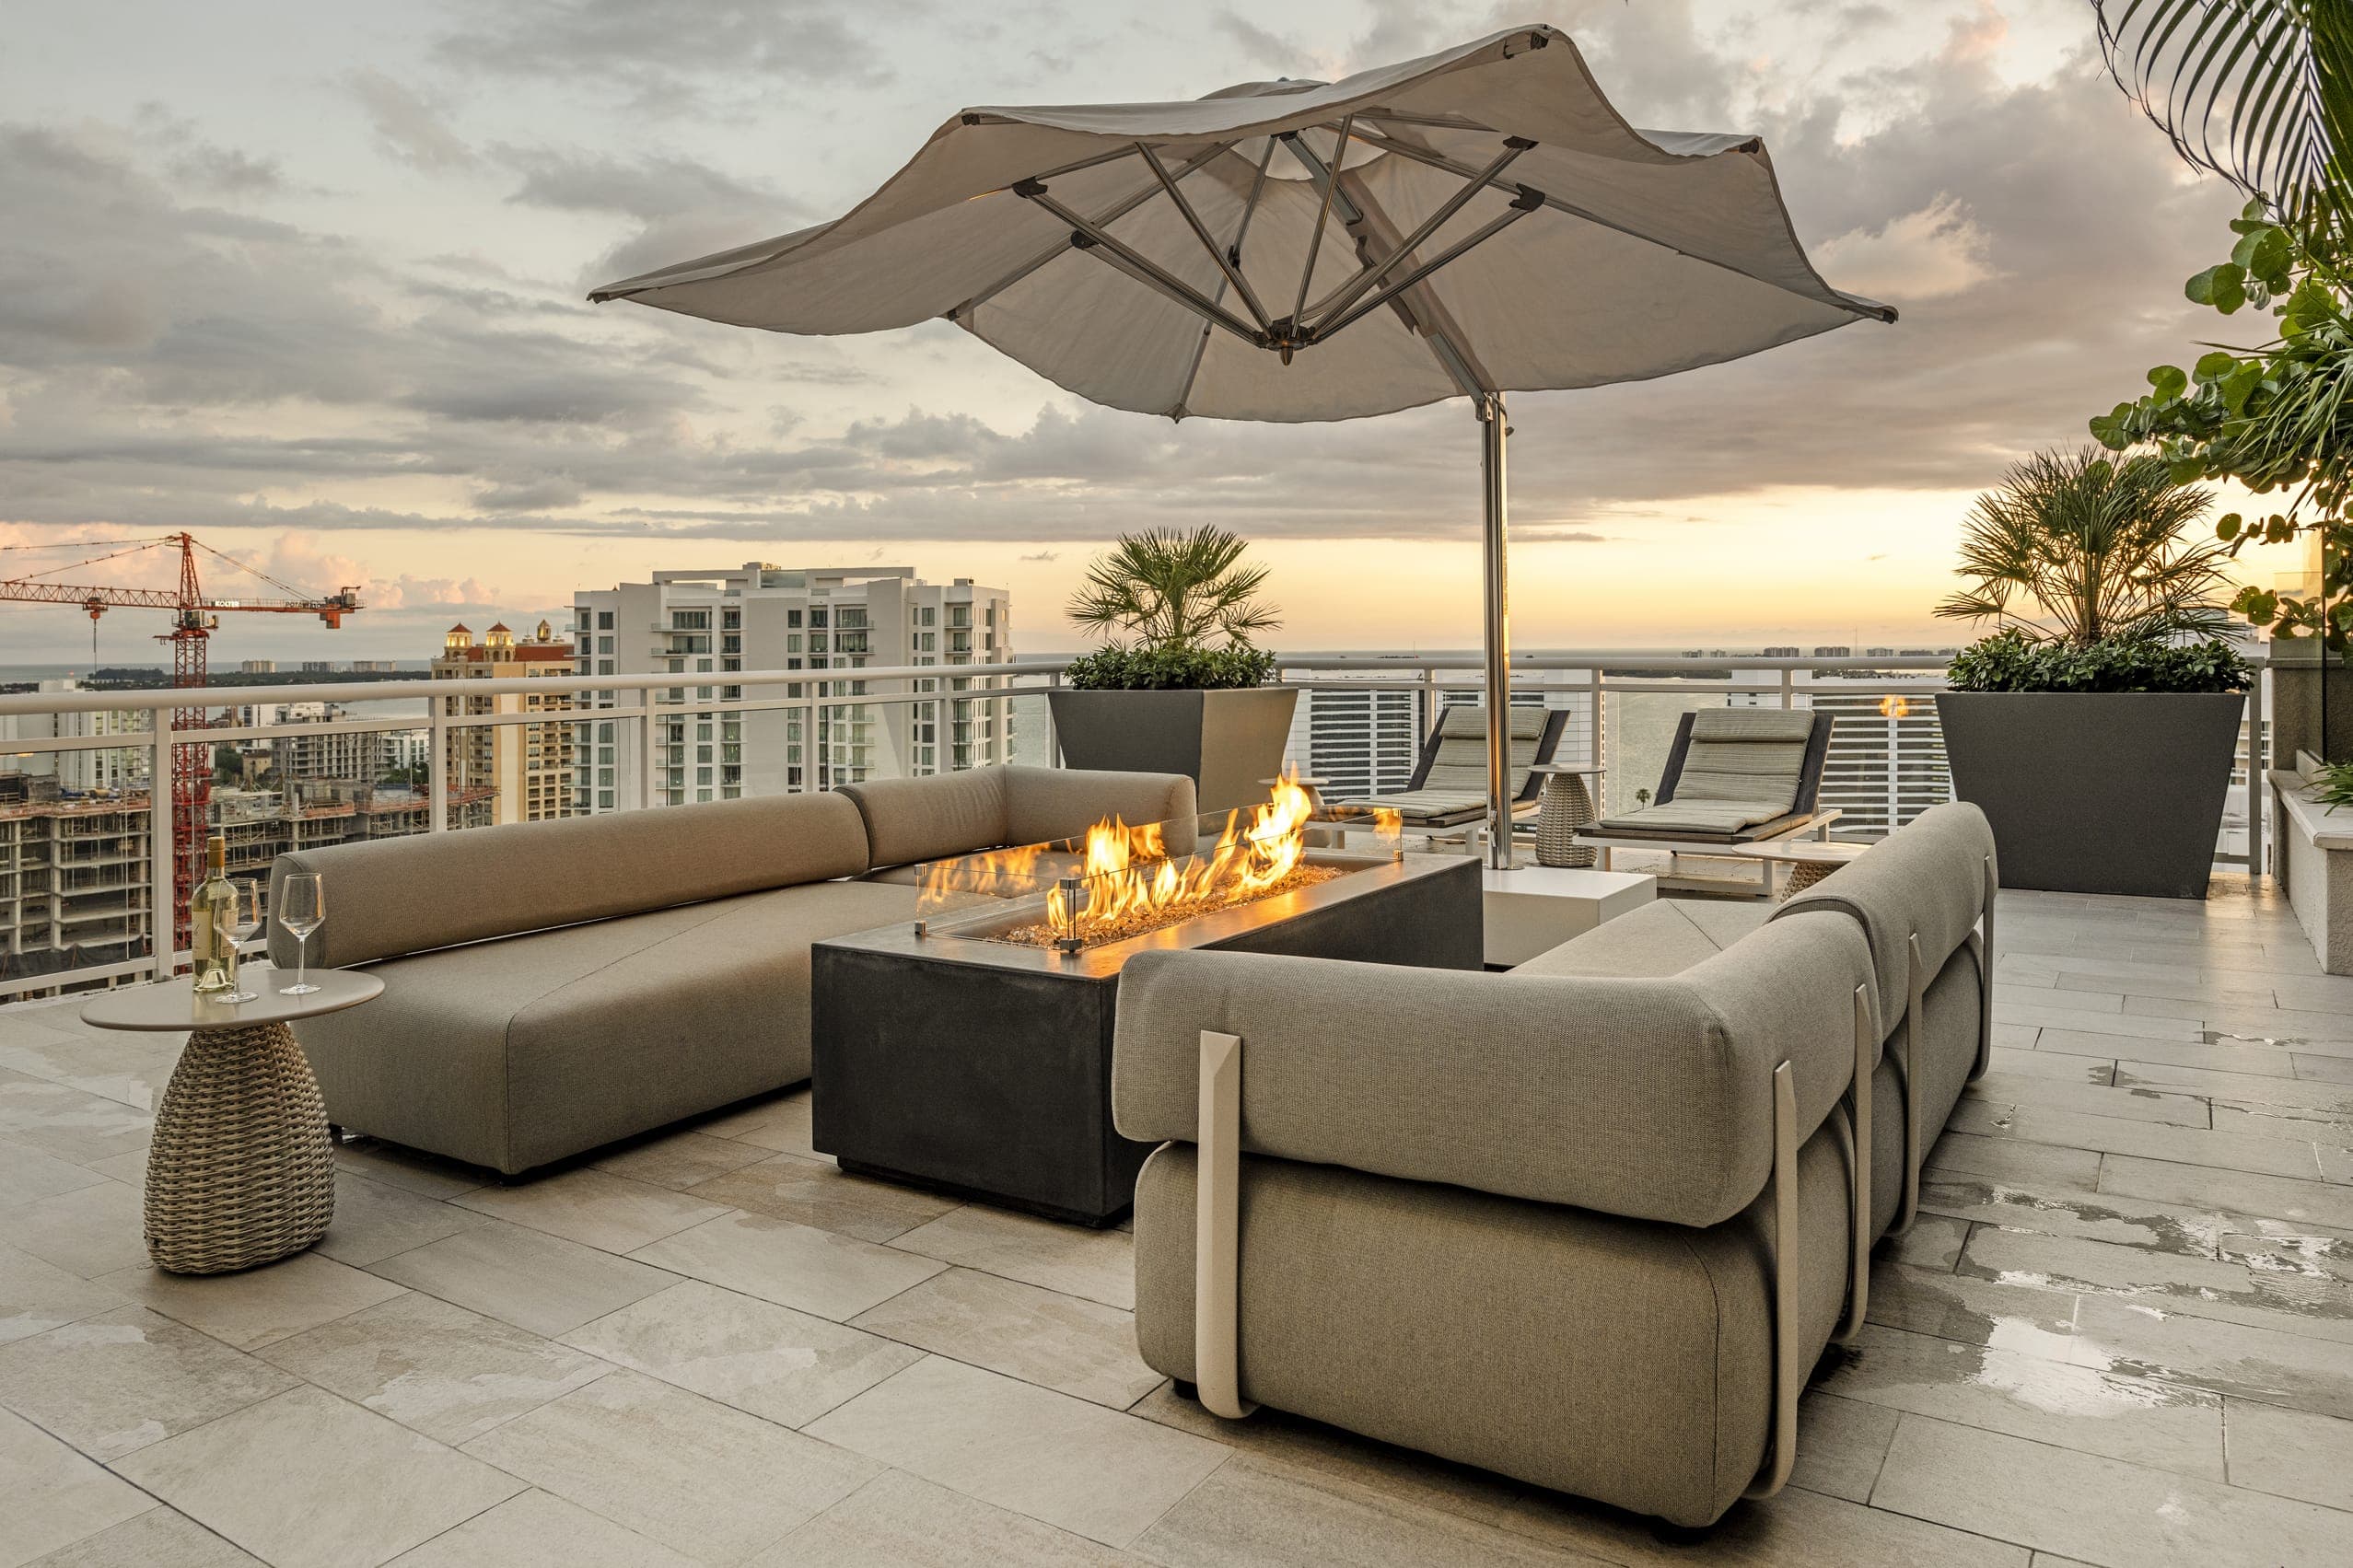 Jkl Penthouse The Blvd Outdoor Sitting Area At Sunset Fire Pit Grey Outdoor Couch